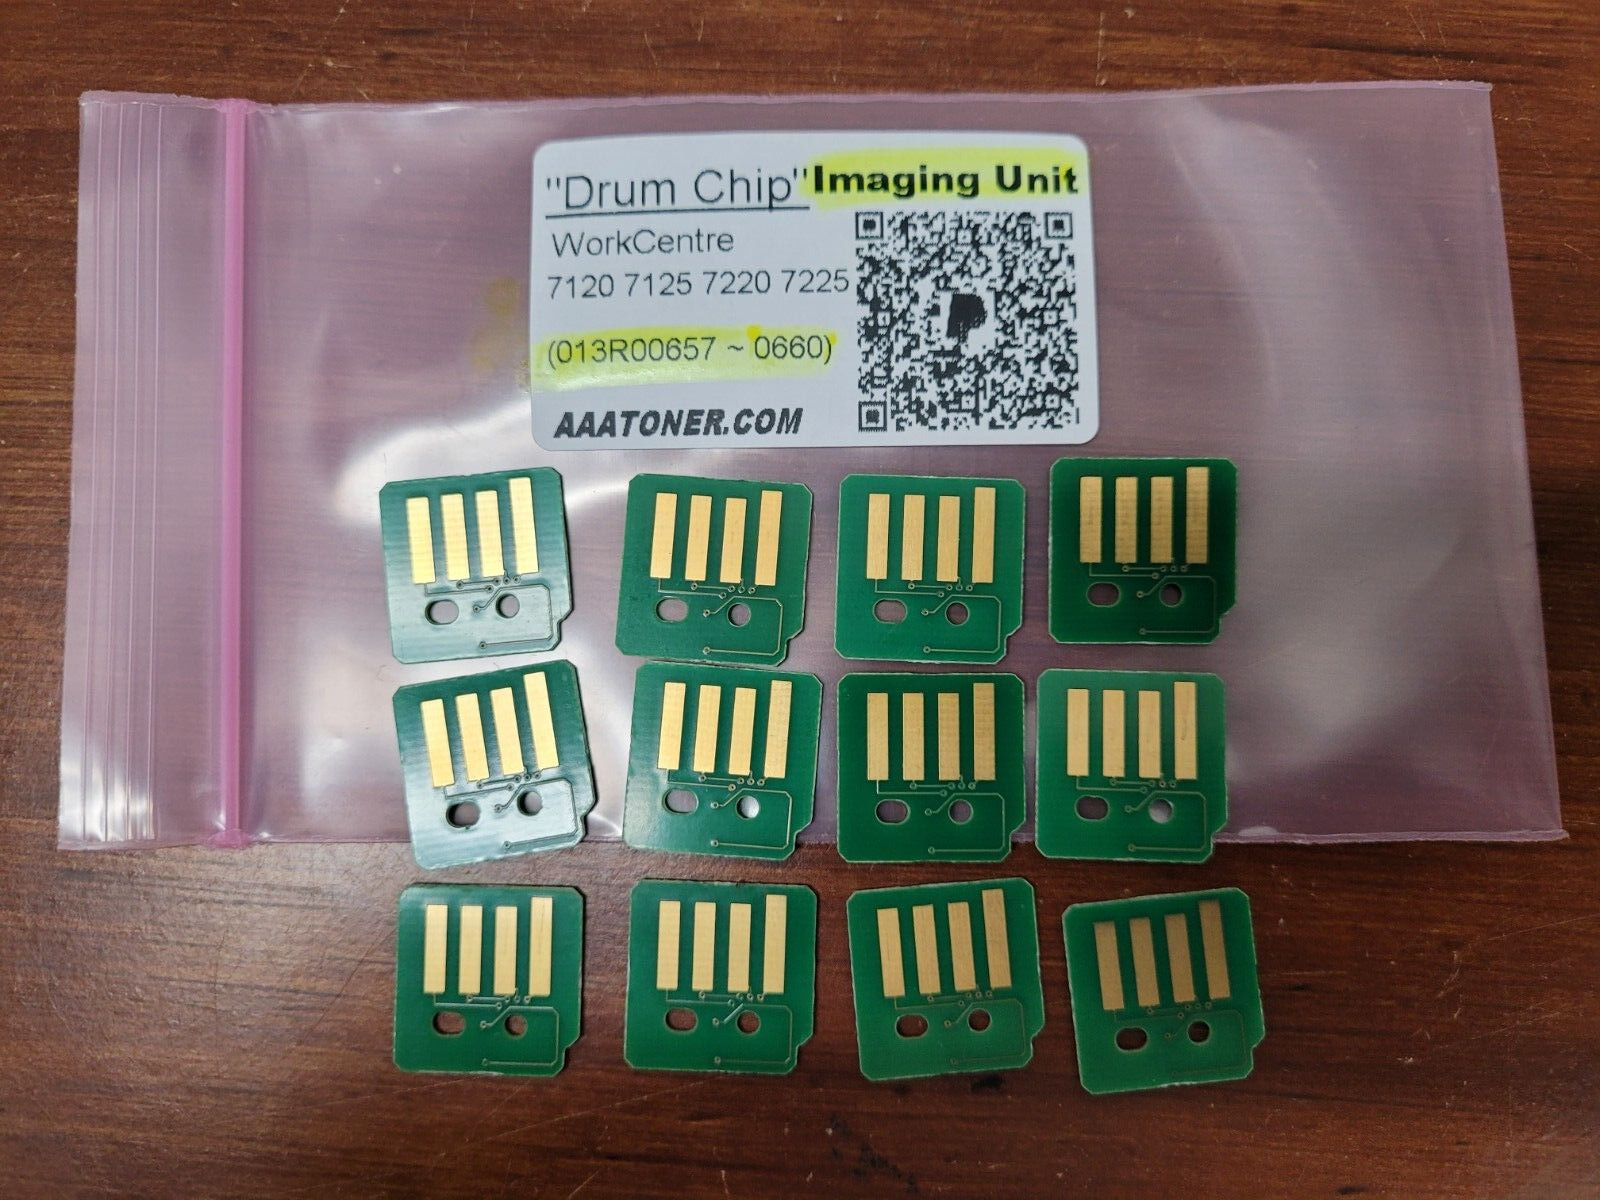 12 x DRUM Chip (IMAGING UNIT) for Xerox Workcentre 7120, 7125, 7220, 7225 Refill